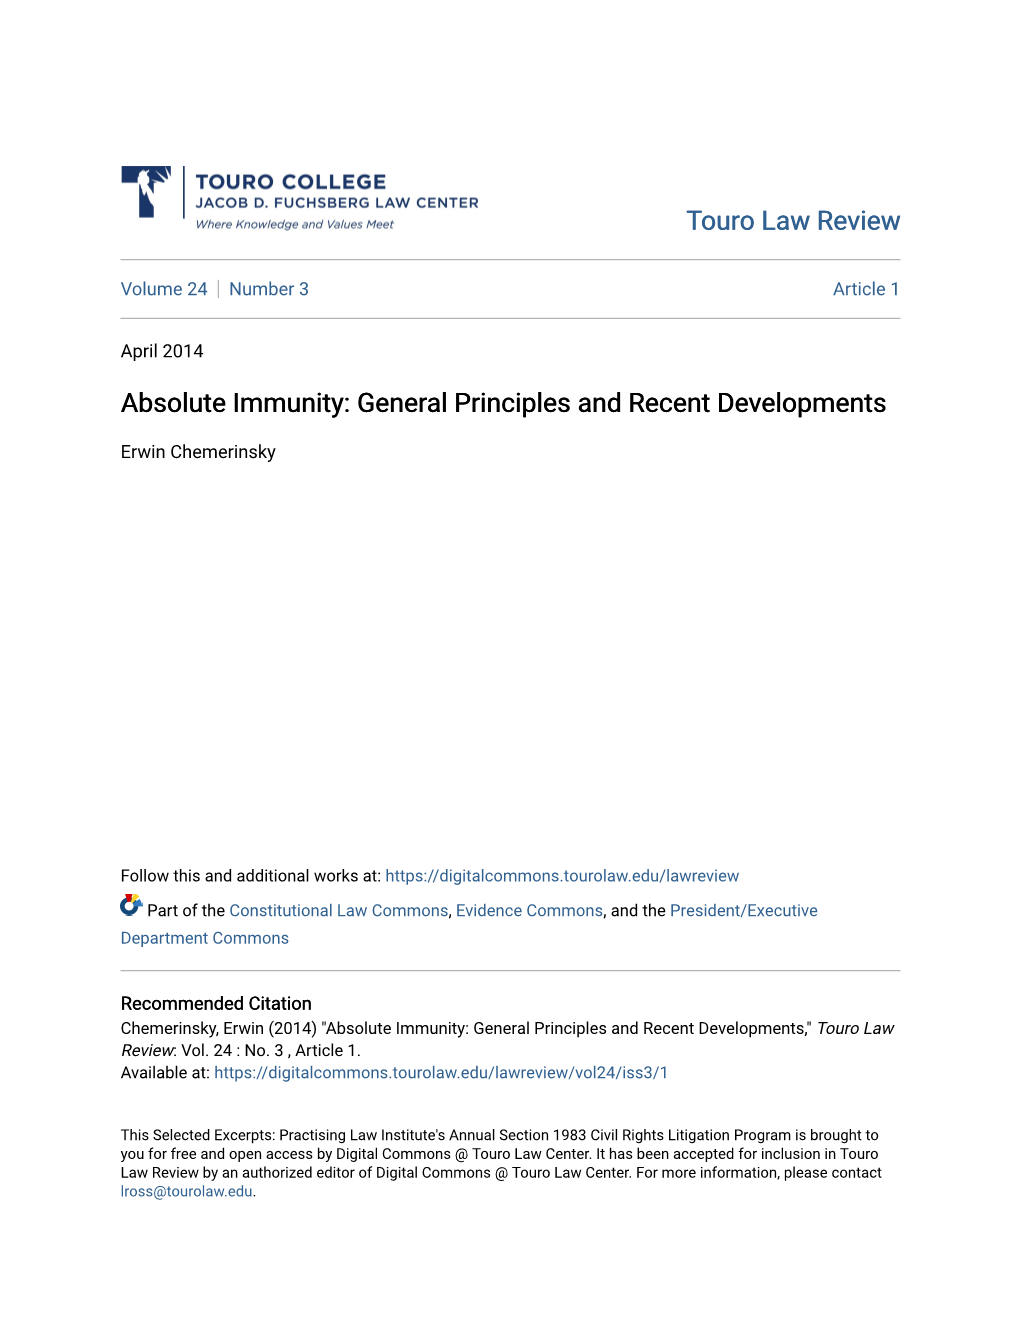 Absolute Immunity: General Principles and Recent Developments